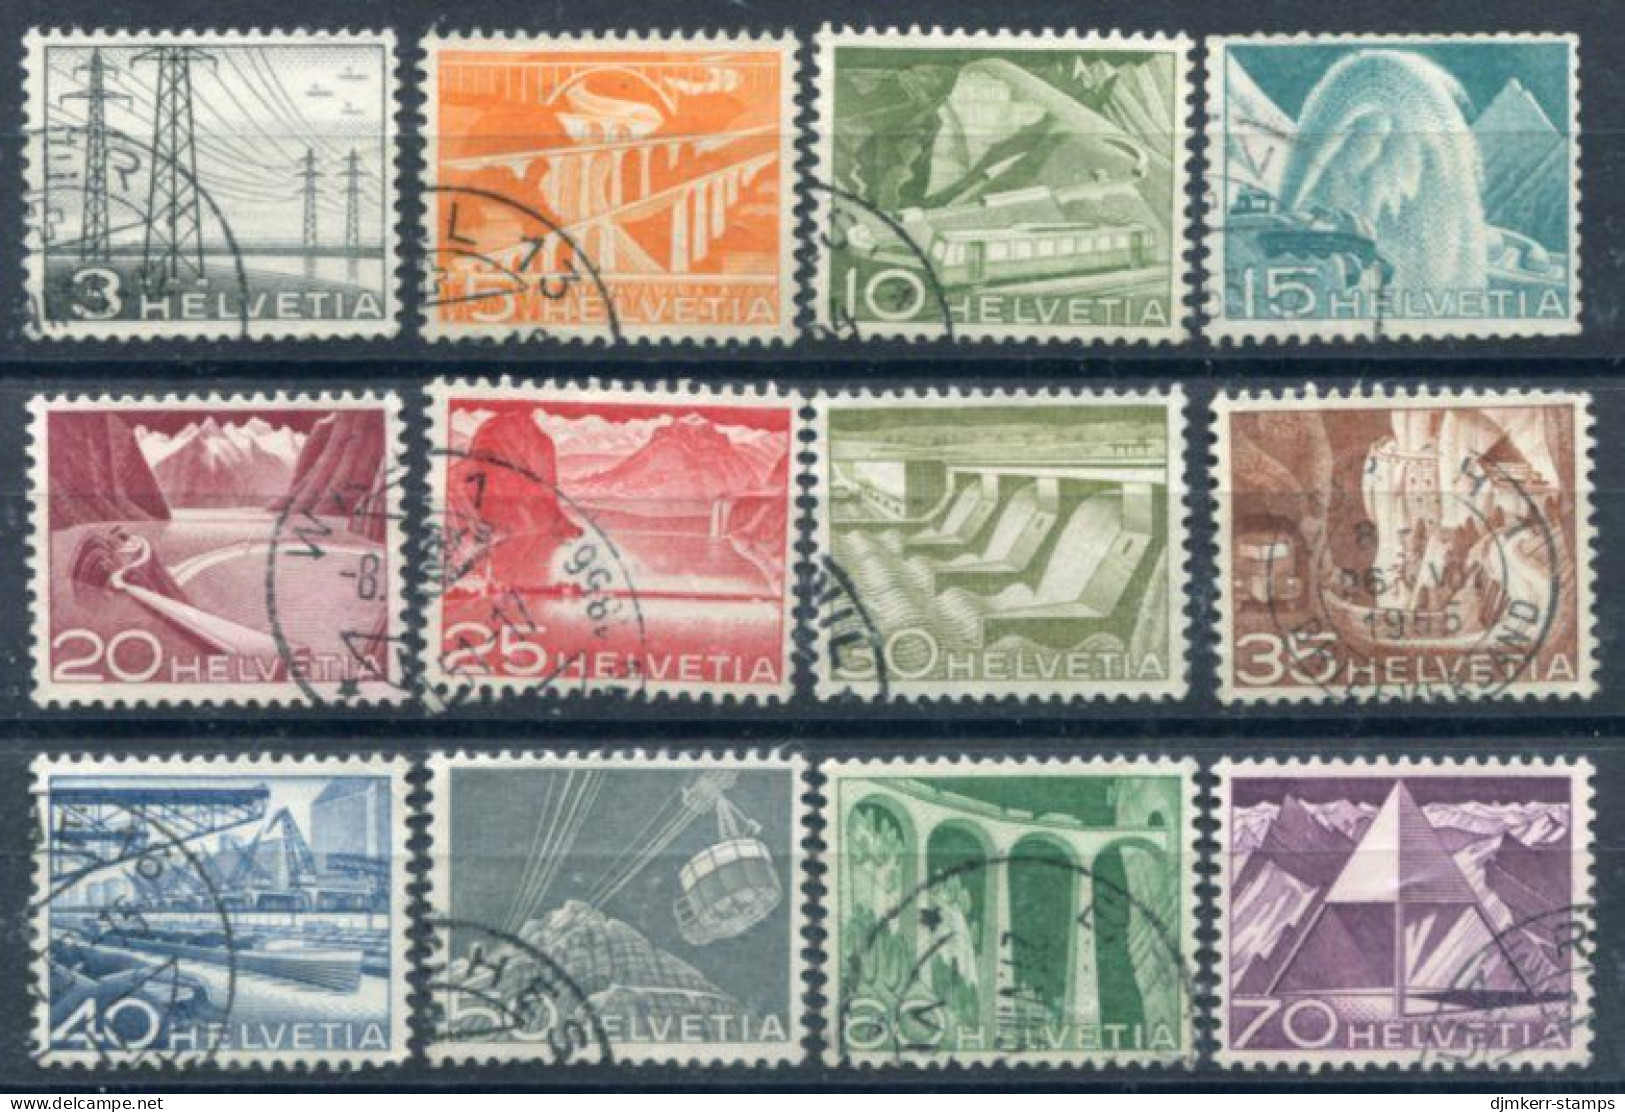 SWITZERLAND 1949 Landscapes And Technology Used. Michel 529-40 - Used Stamps